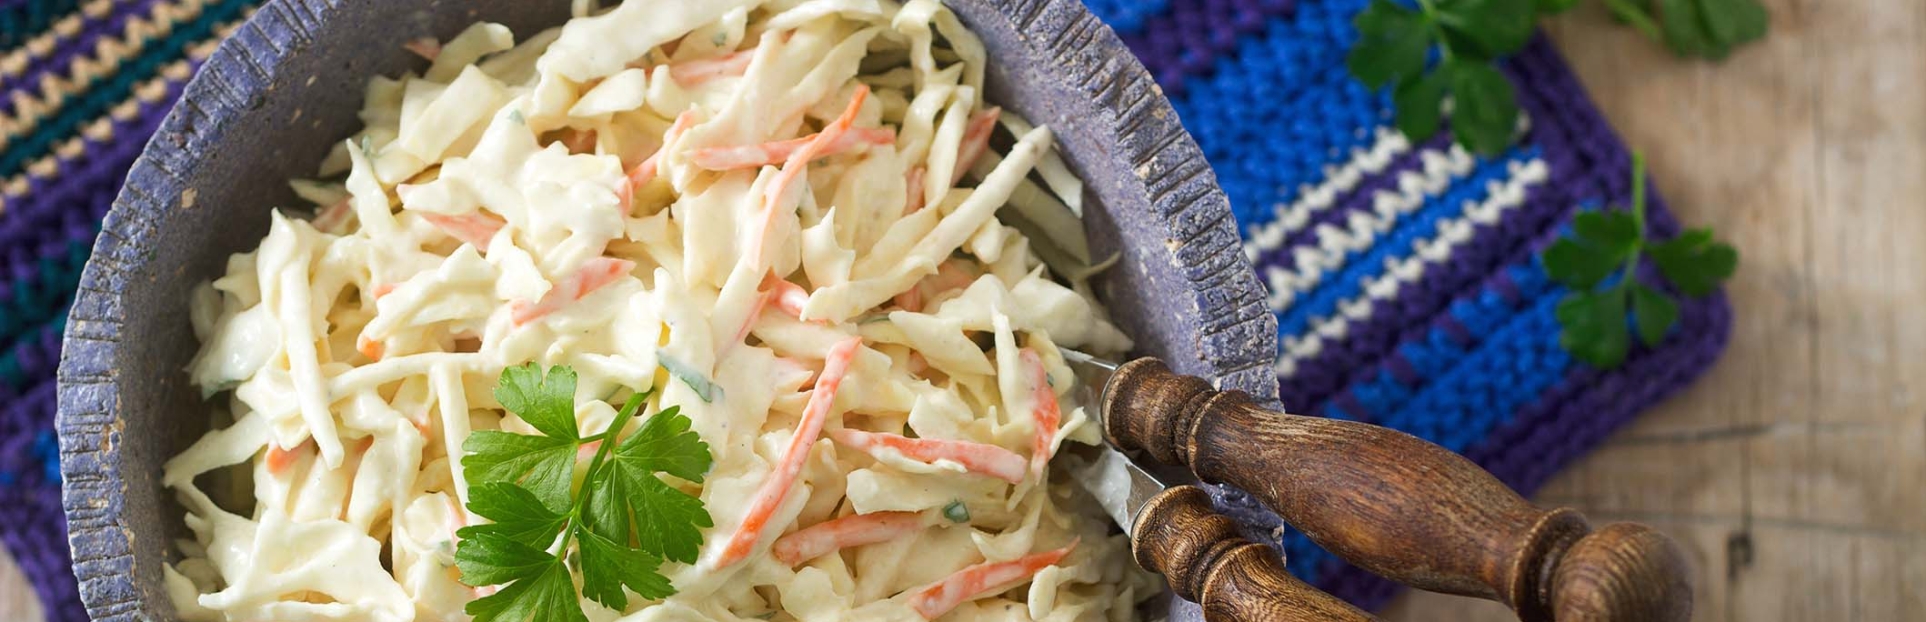 an image of coleslaw in a bowl